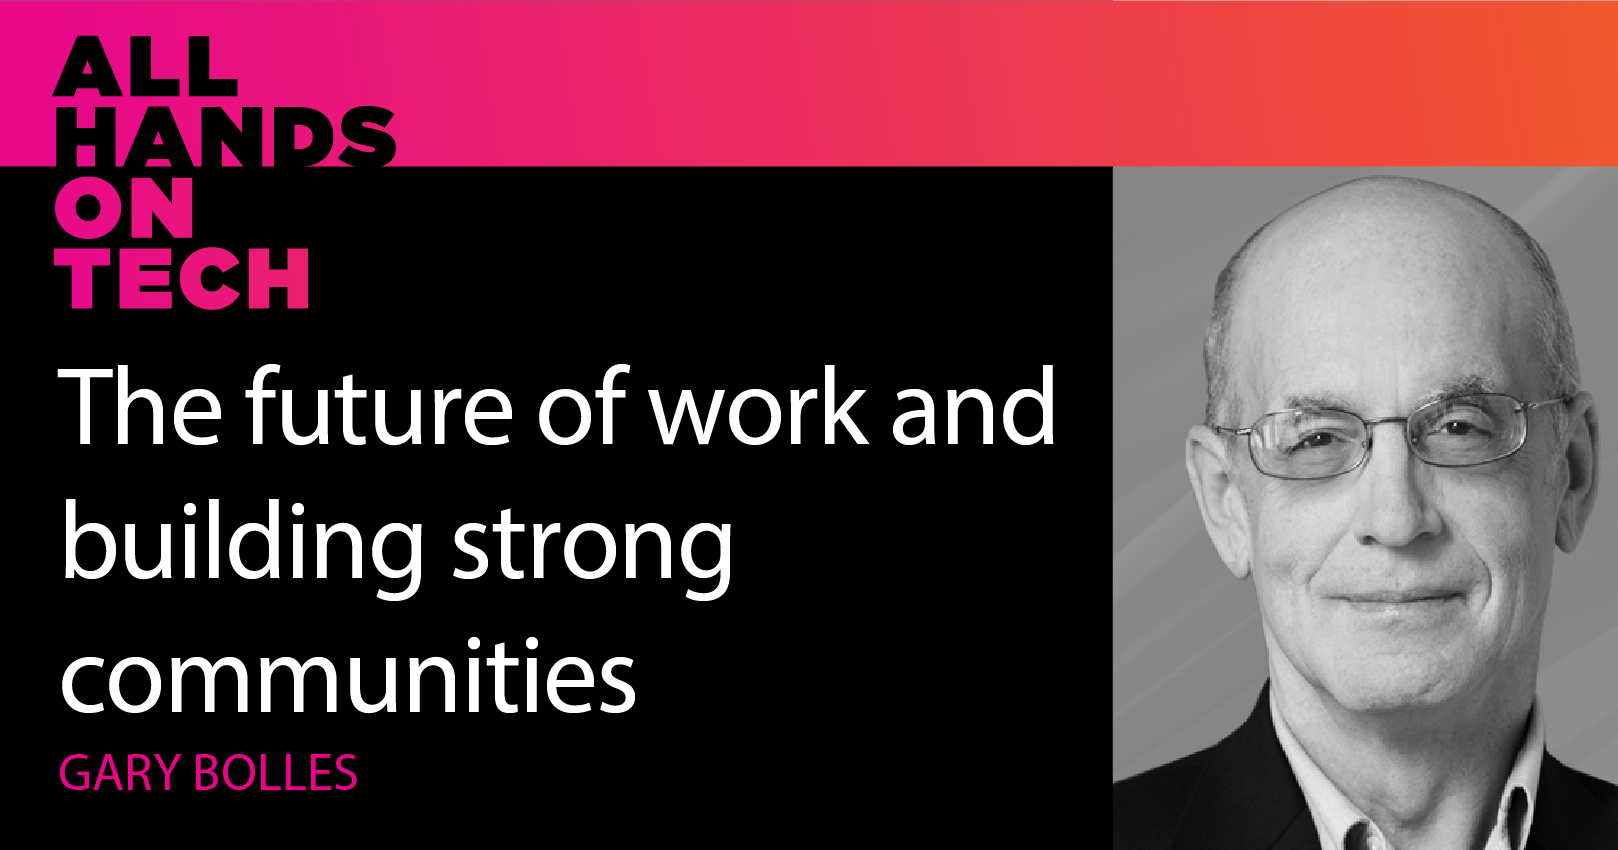 025 - Gary Bolles on the future of work and building strong communities